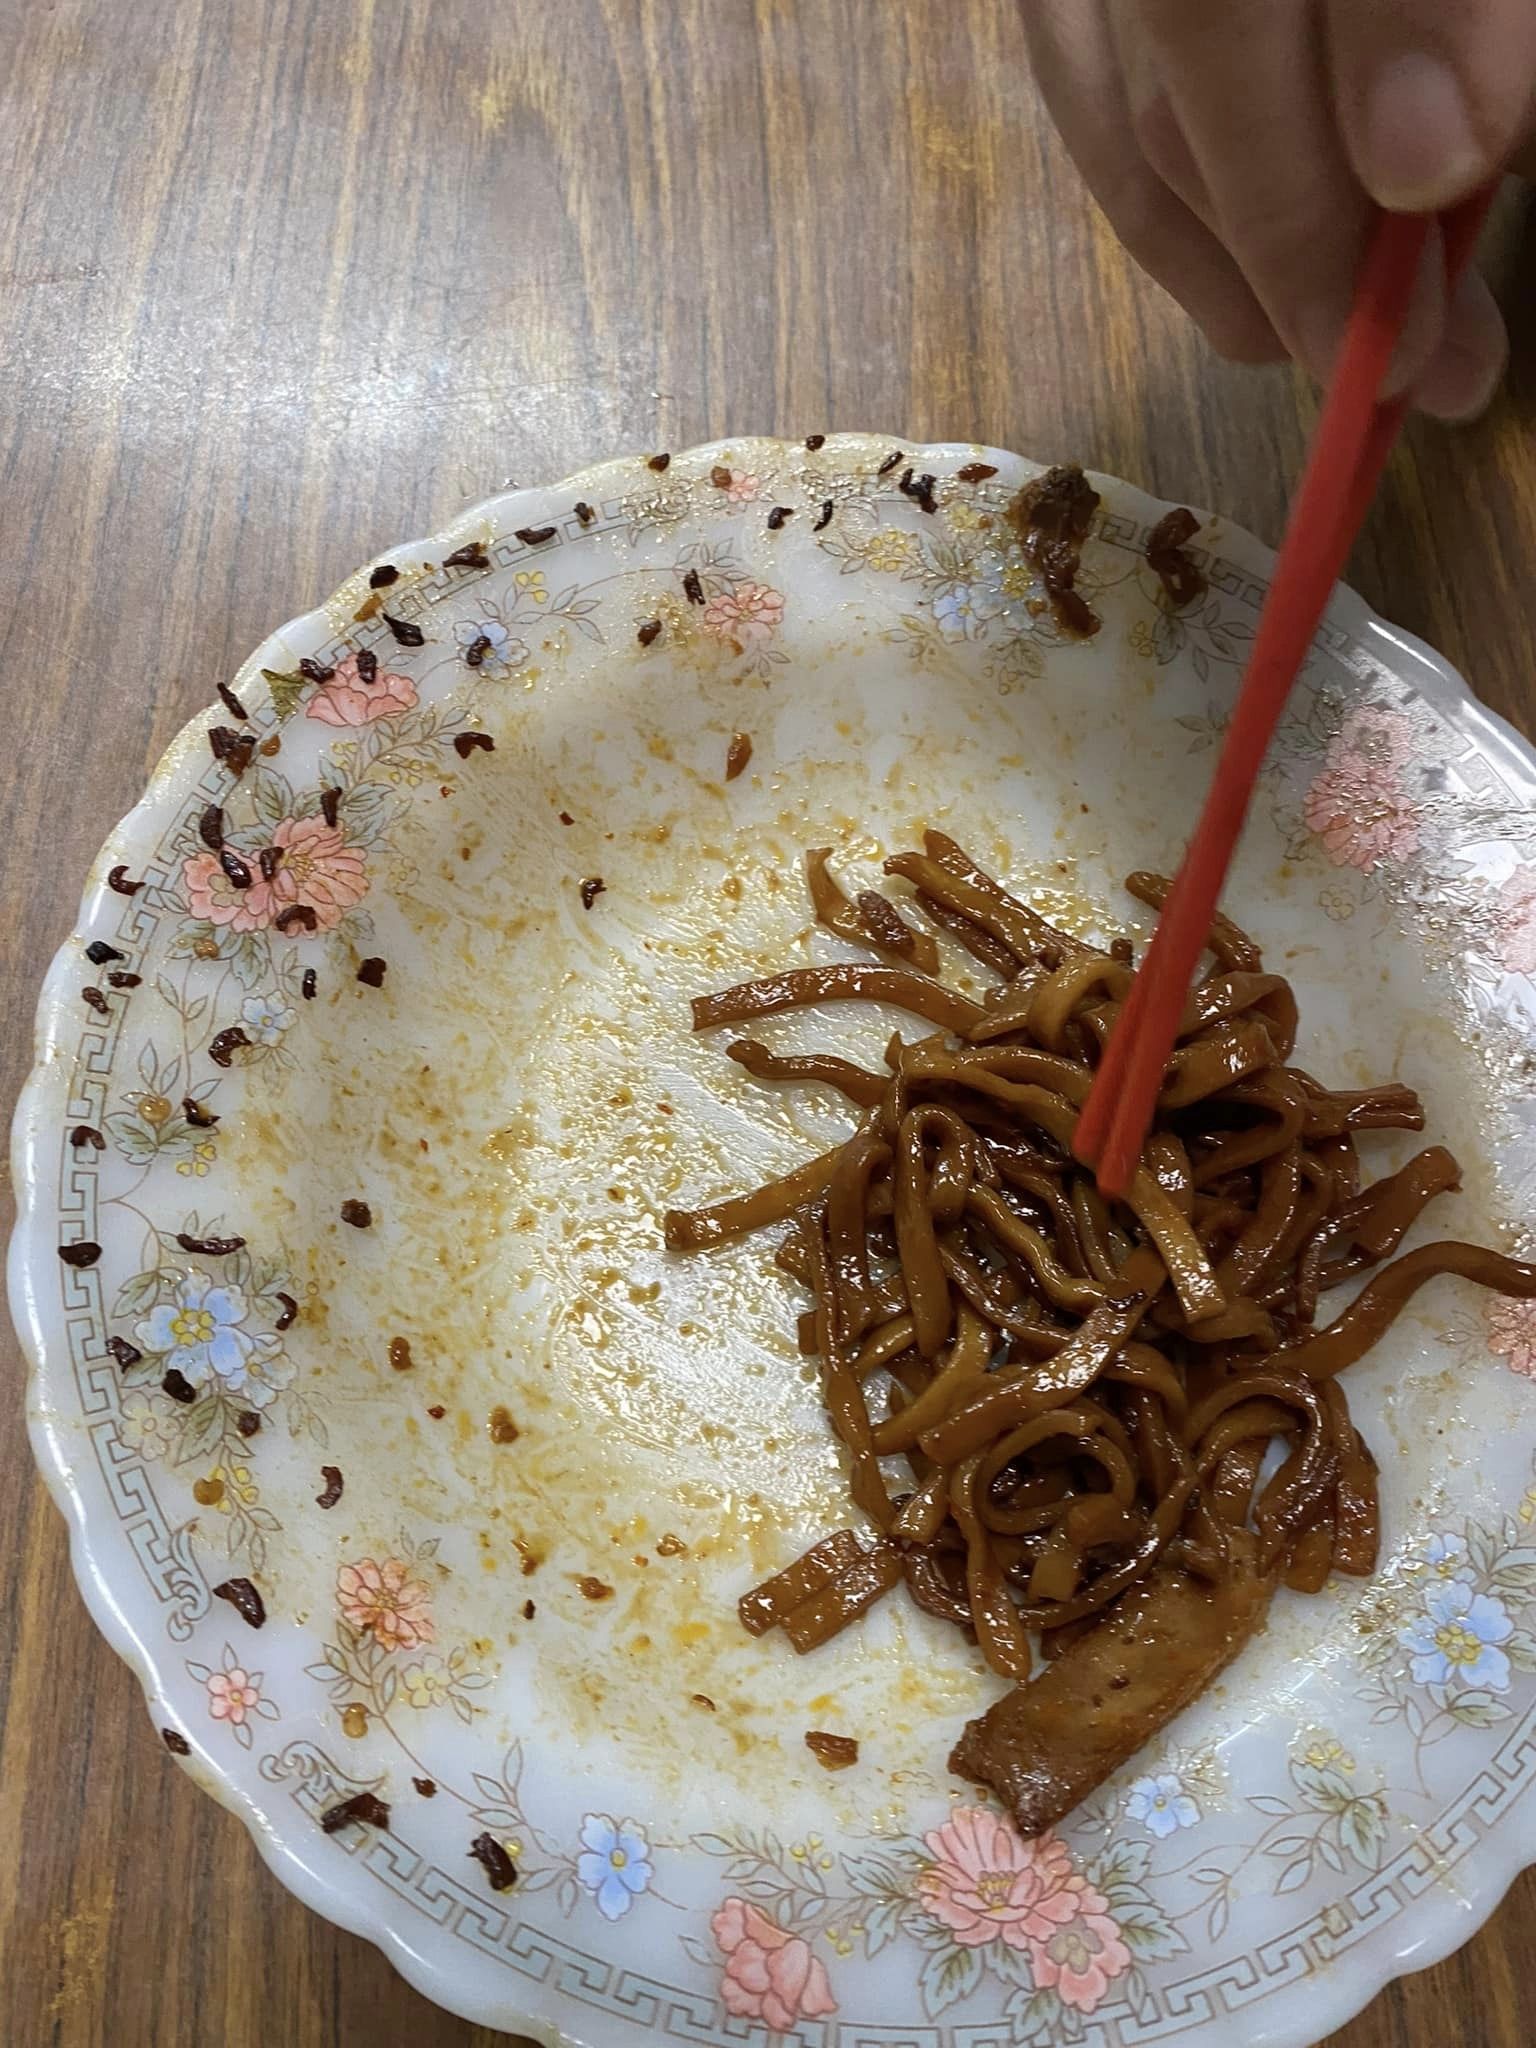 Insect remains in noodles